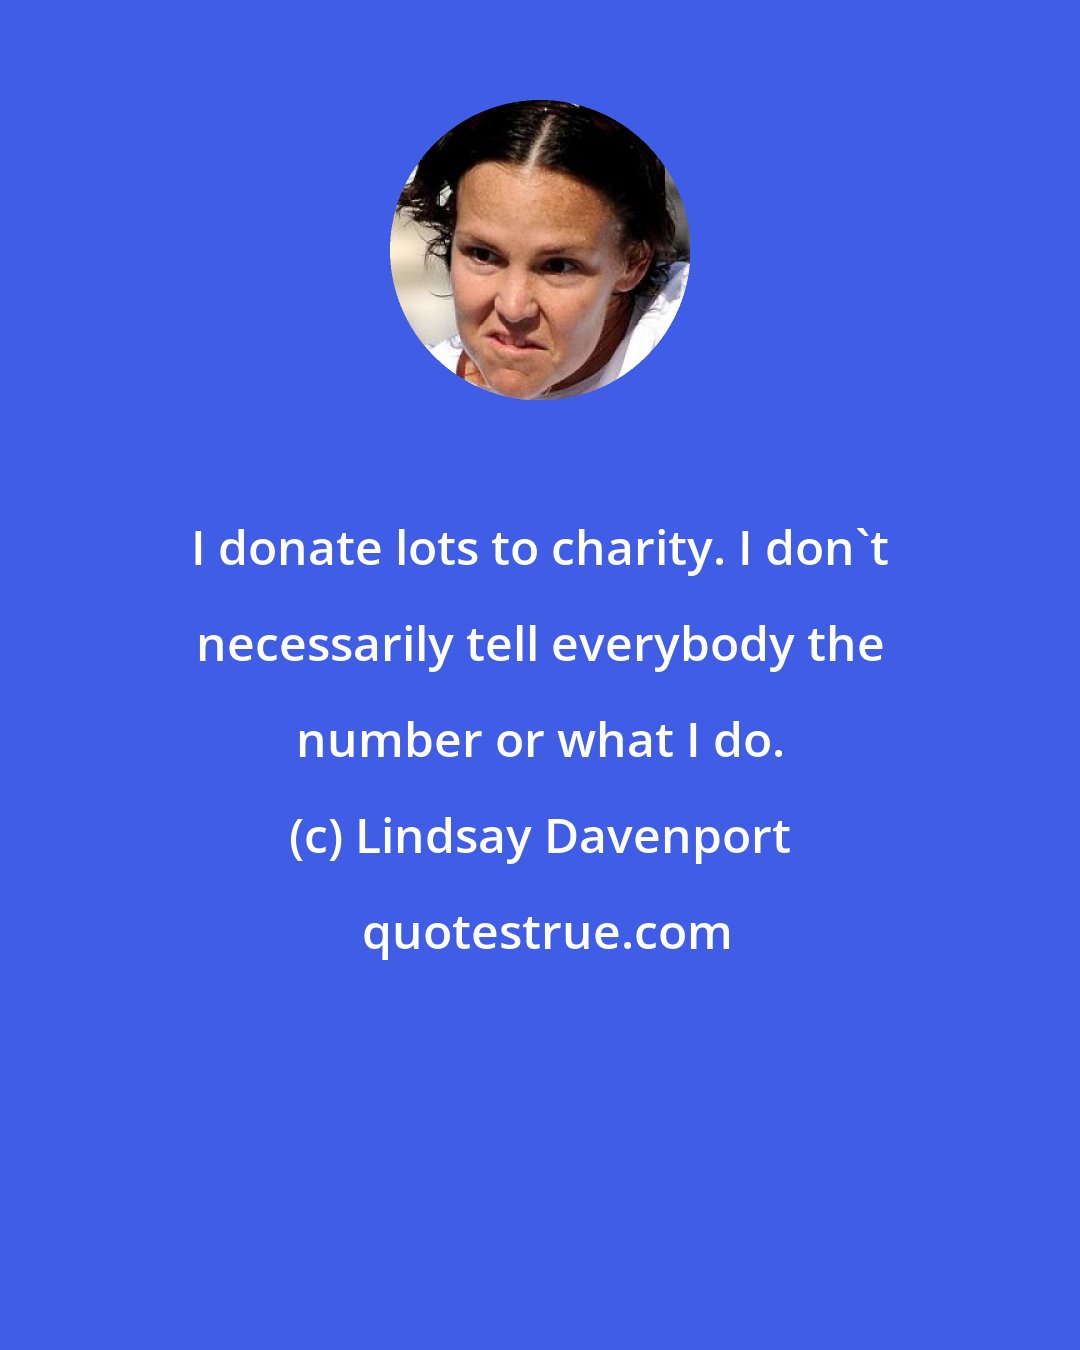 Lindsay Davenport: I donate lots to charity. I don't necessarily tell everybody the number or what I do.